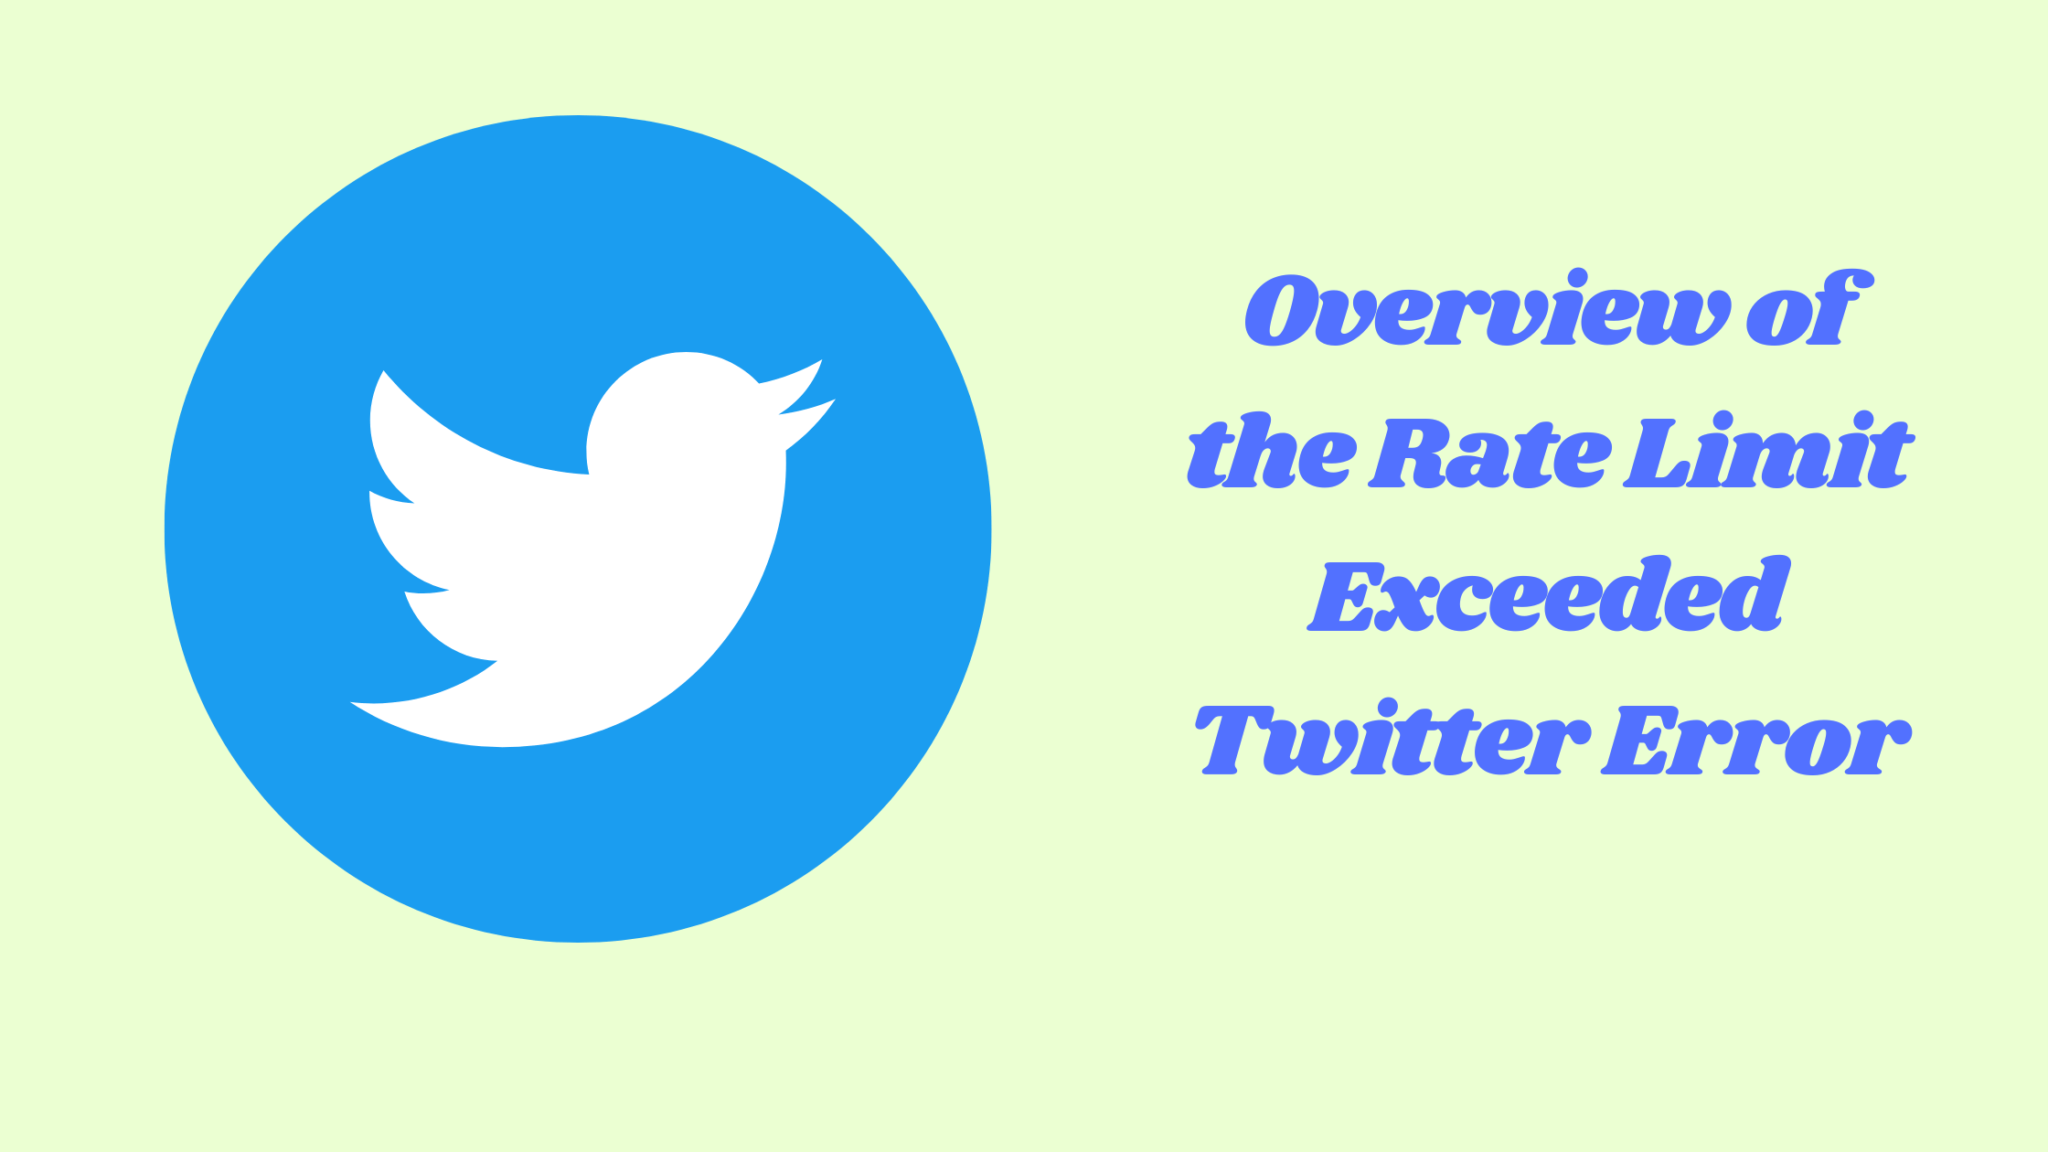 What Does “Rate Limit Exceeded” Mean on Twitter? (All You Need To Know